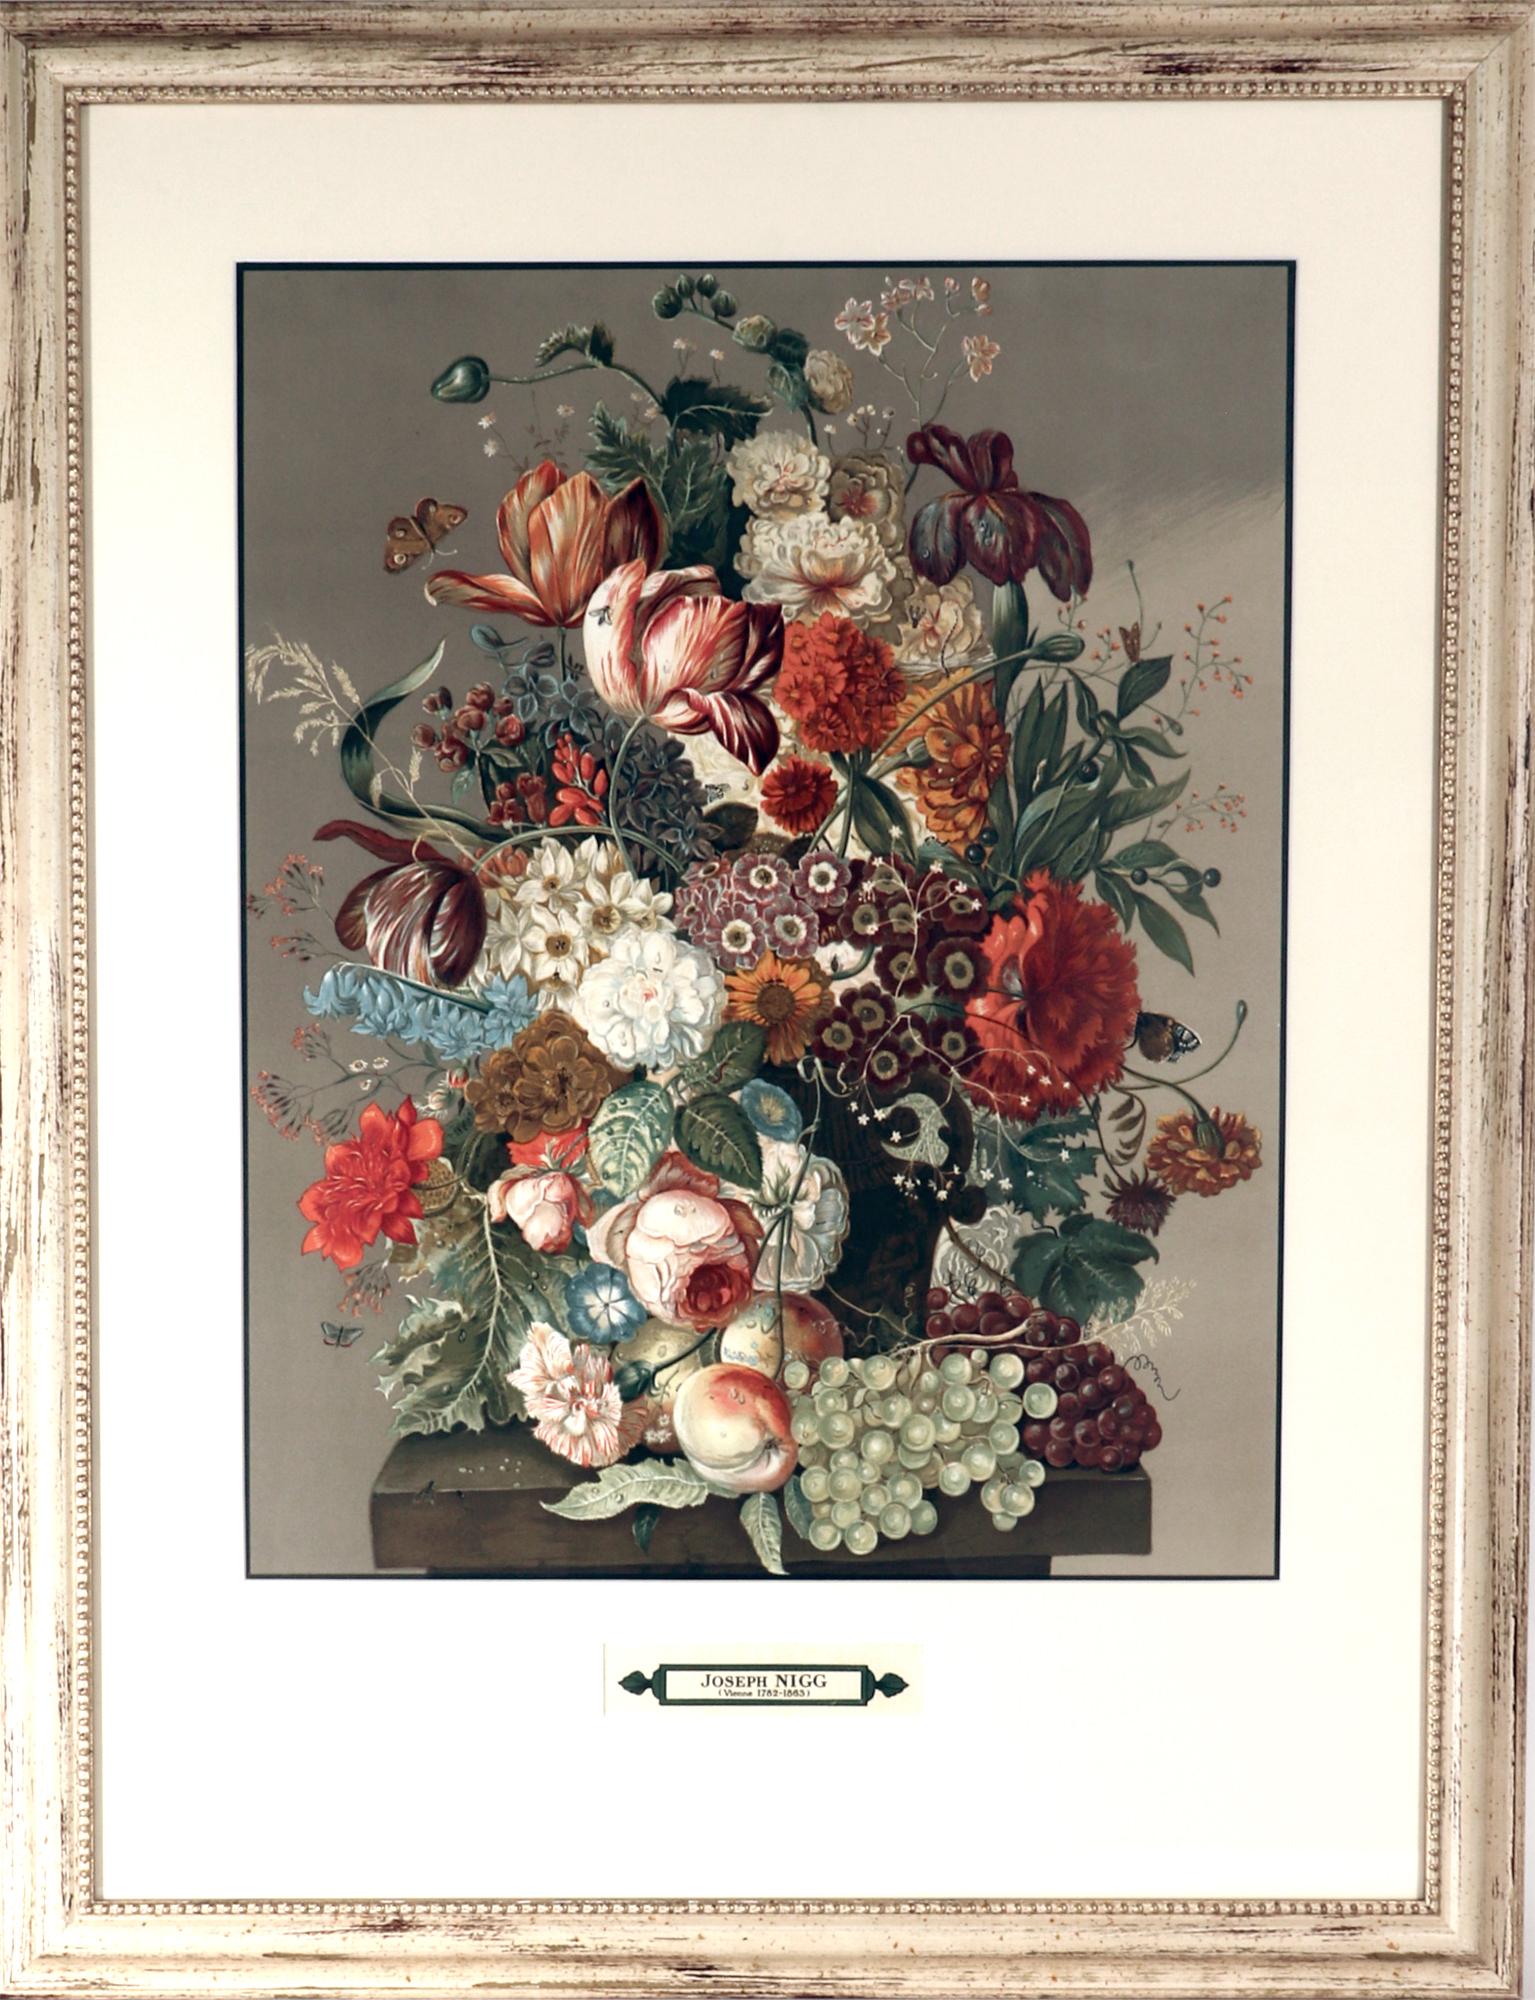 Botanical Print after the painting of the Austrian painter, Joseph Nigg, (1782-1863)

Artist: Joseph Nigg (1782-1863)

Medium: Lithograph

Dimensions: 39 3/4 inches high x 31 inches wide x 1 inch deep

Year: 1947

Edition: Limited edition